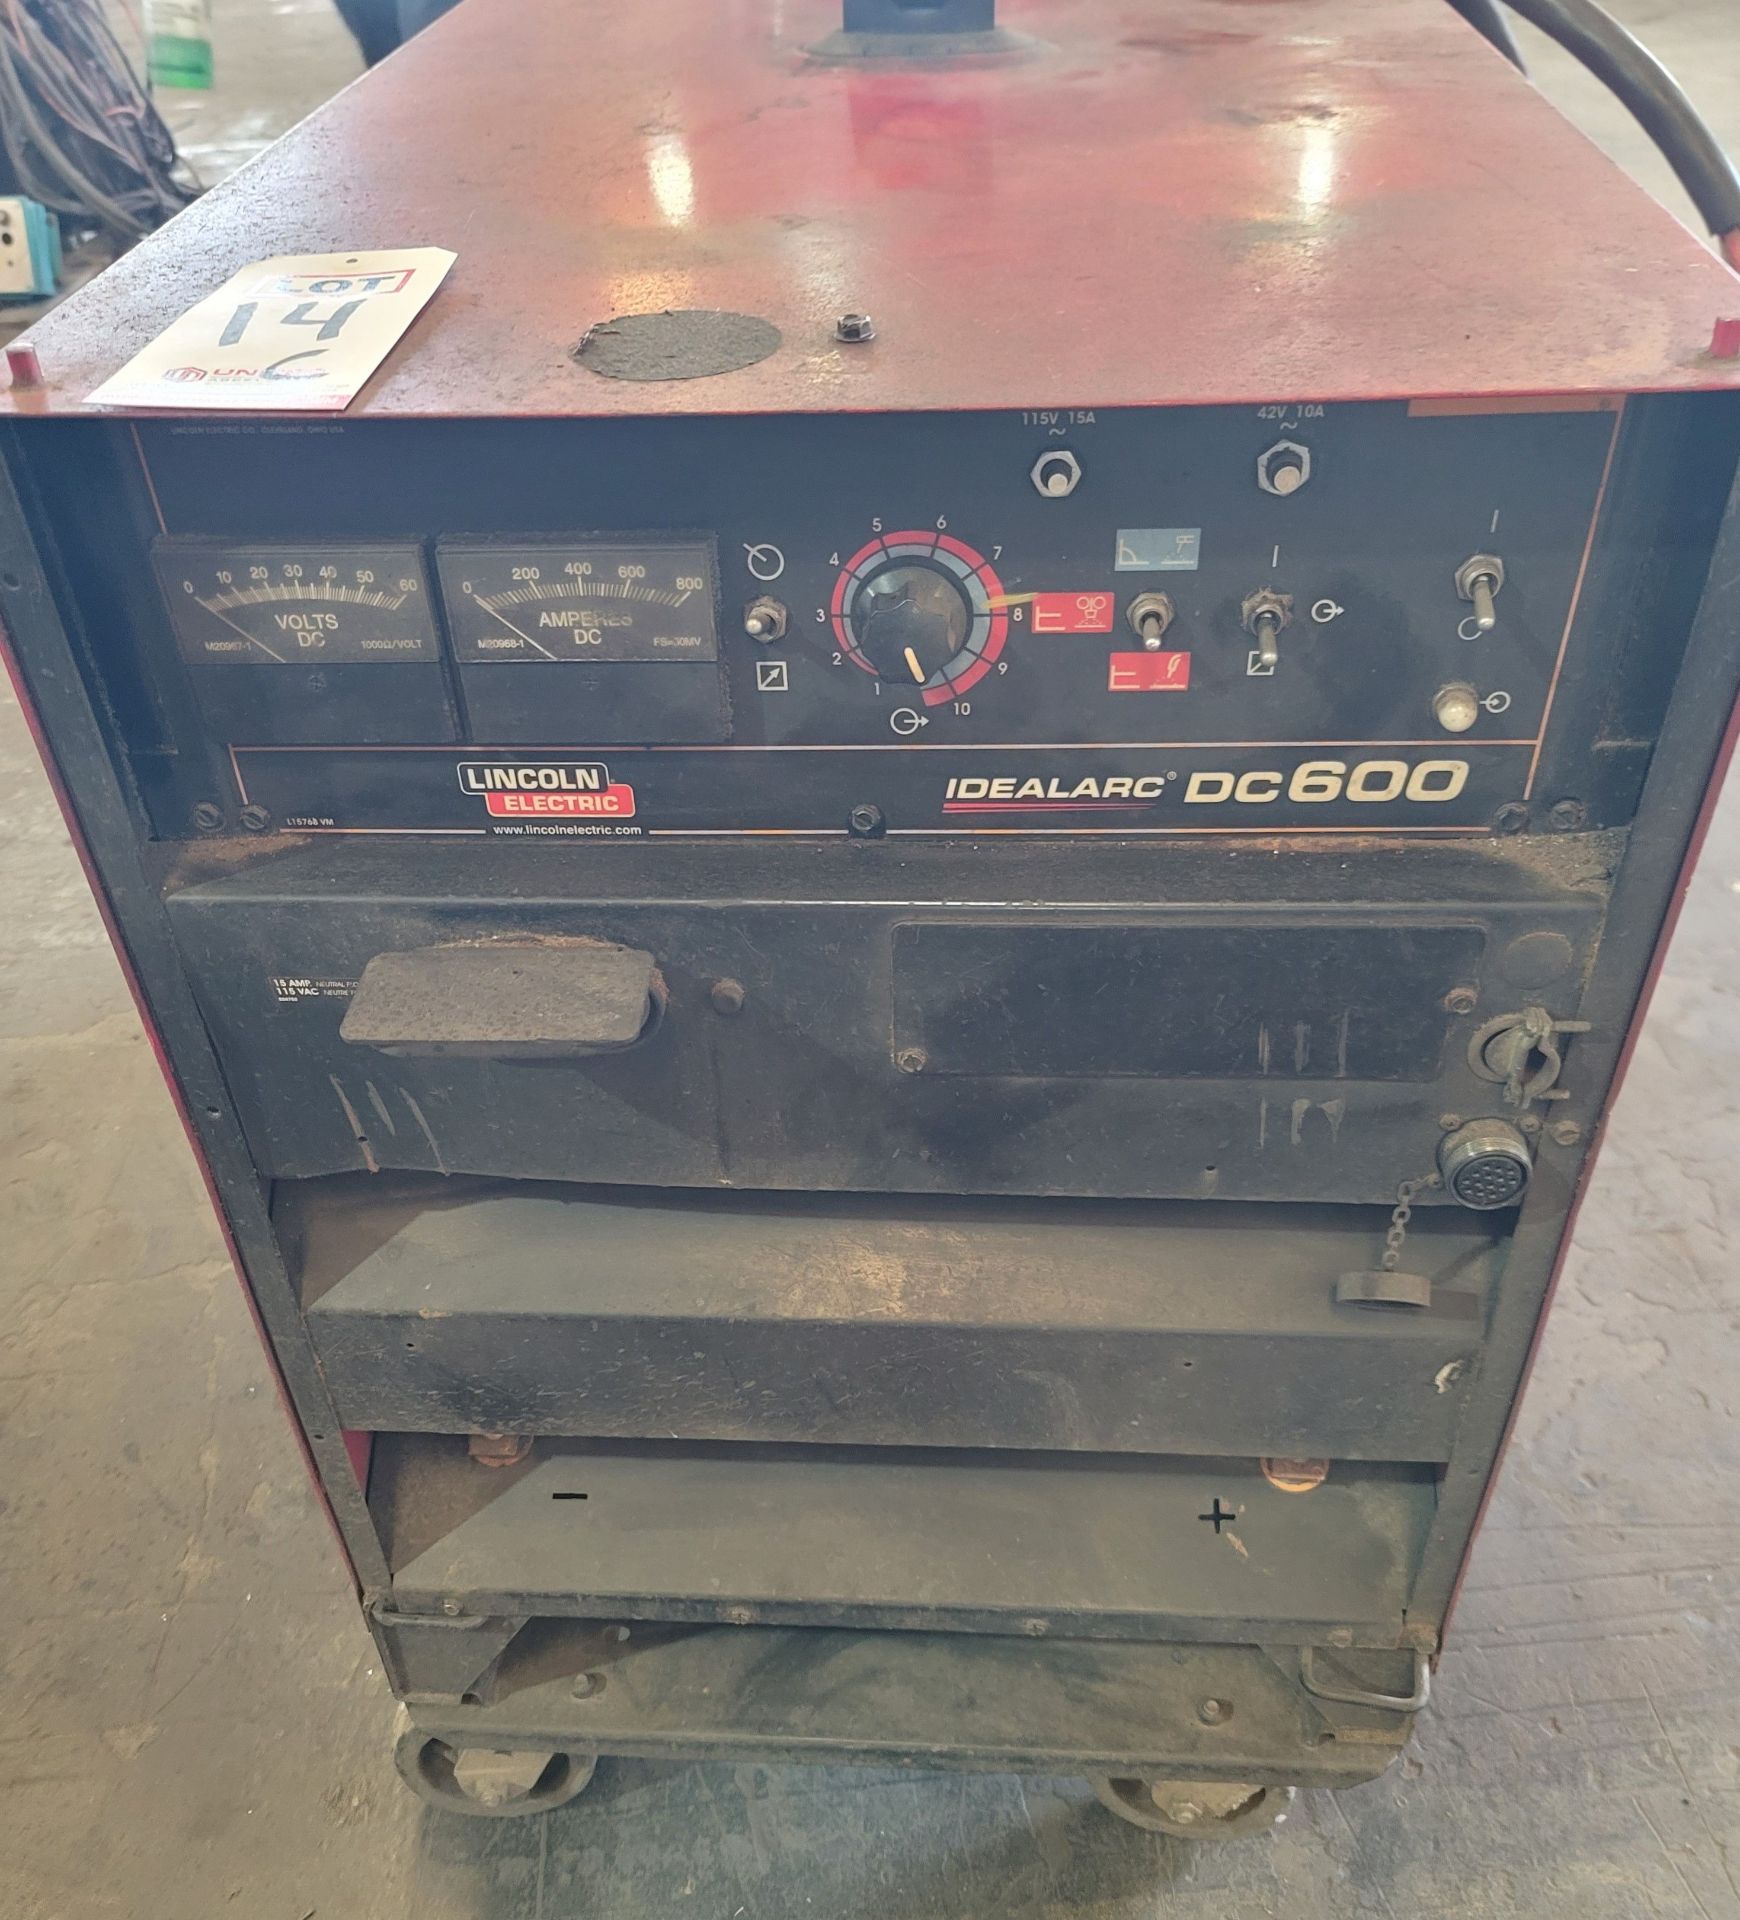 LINCOLN ELECTRIC IDEALARC DC-600 MULTI-PROCESS WELDING POWER SOURCE, CODE: 11537, S/N U1150301906 - Image 3 of 3